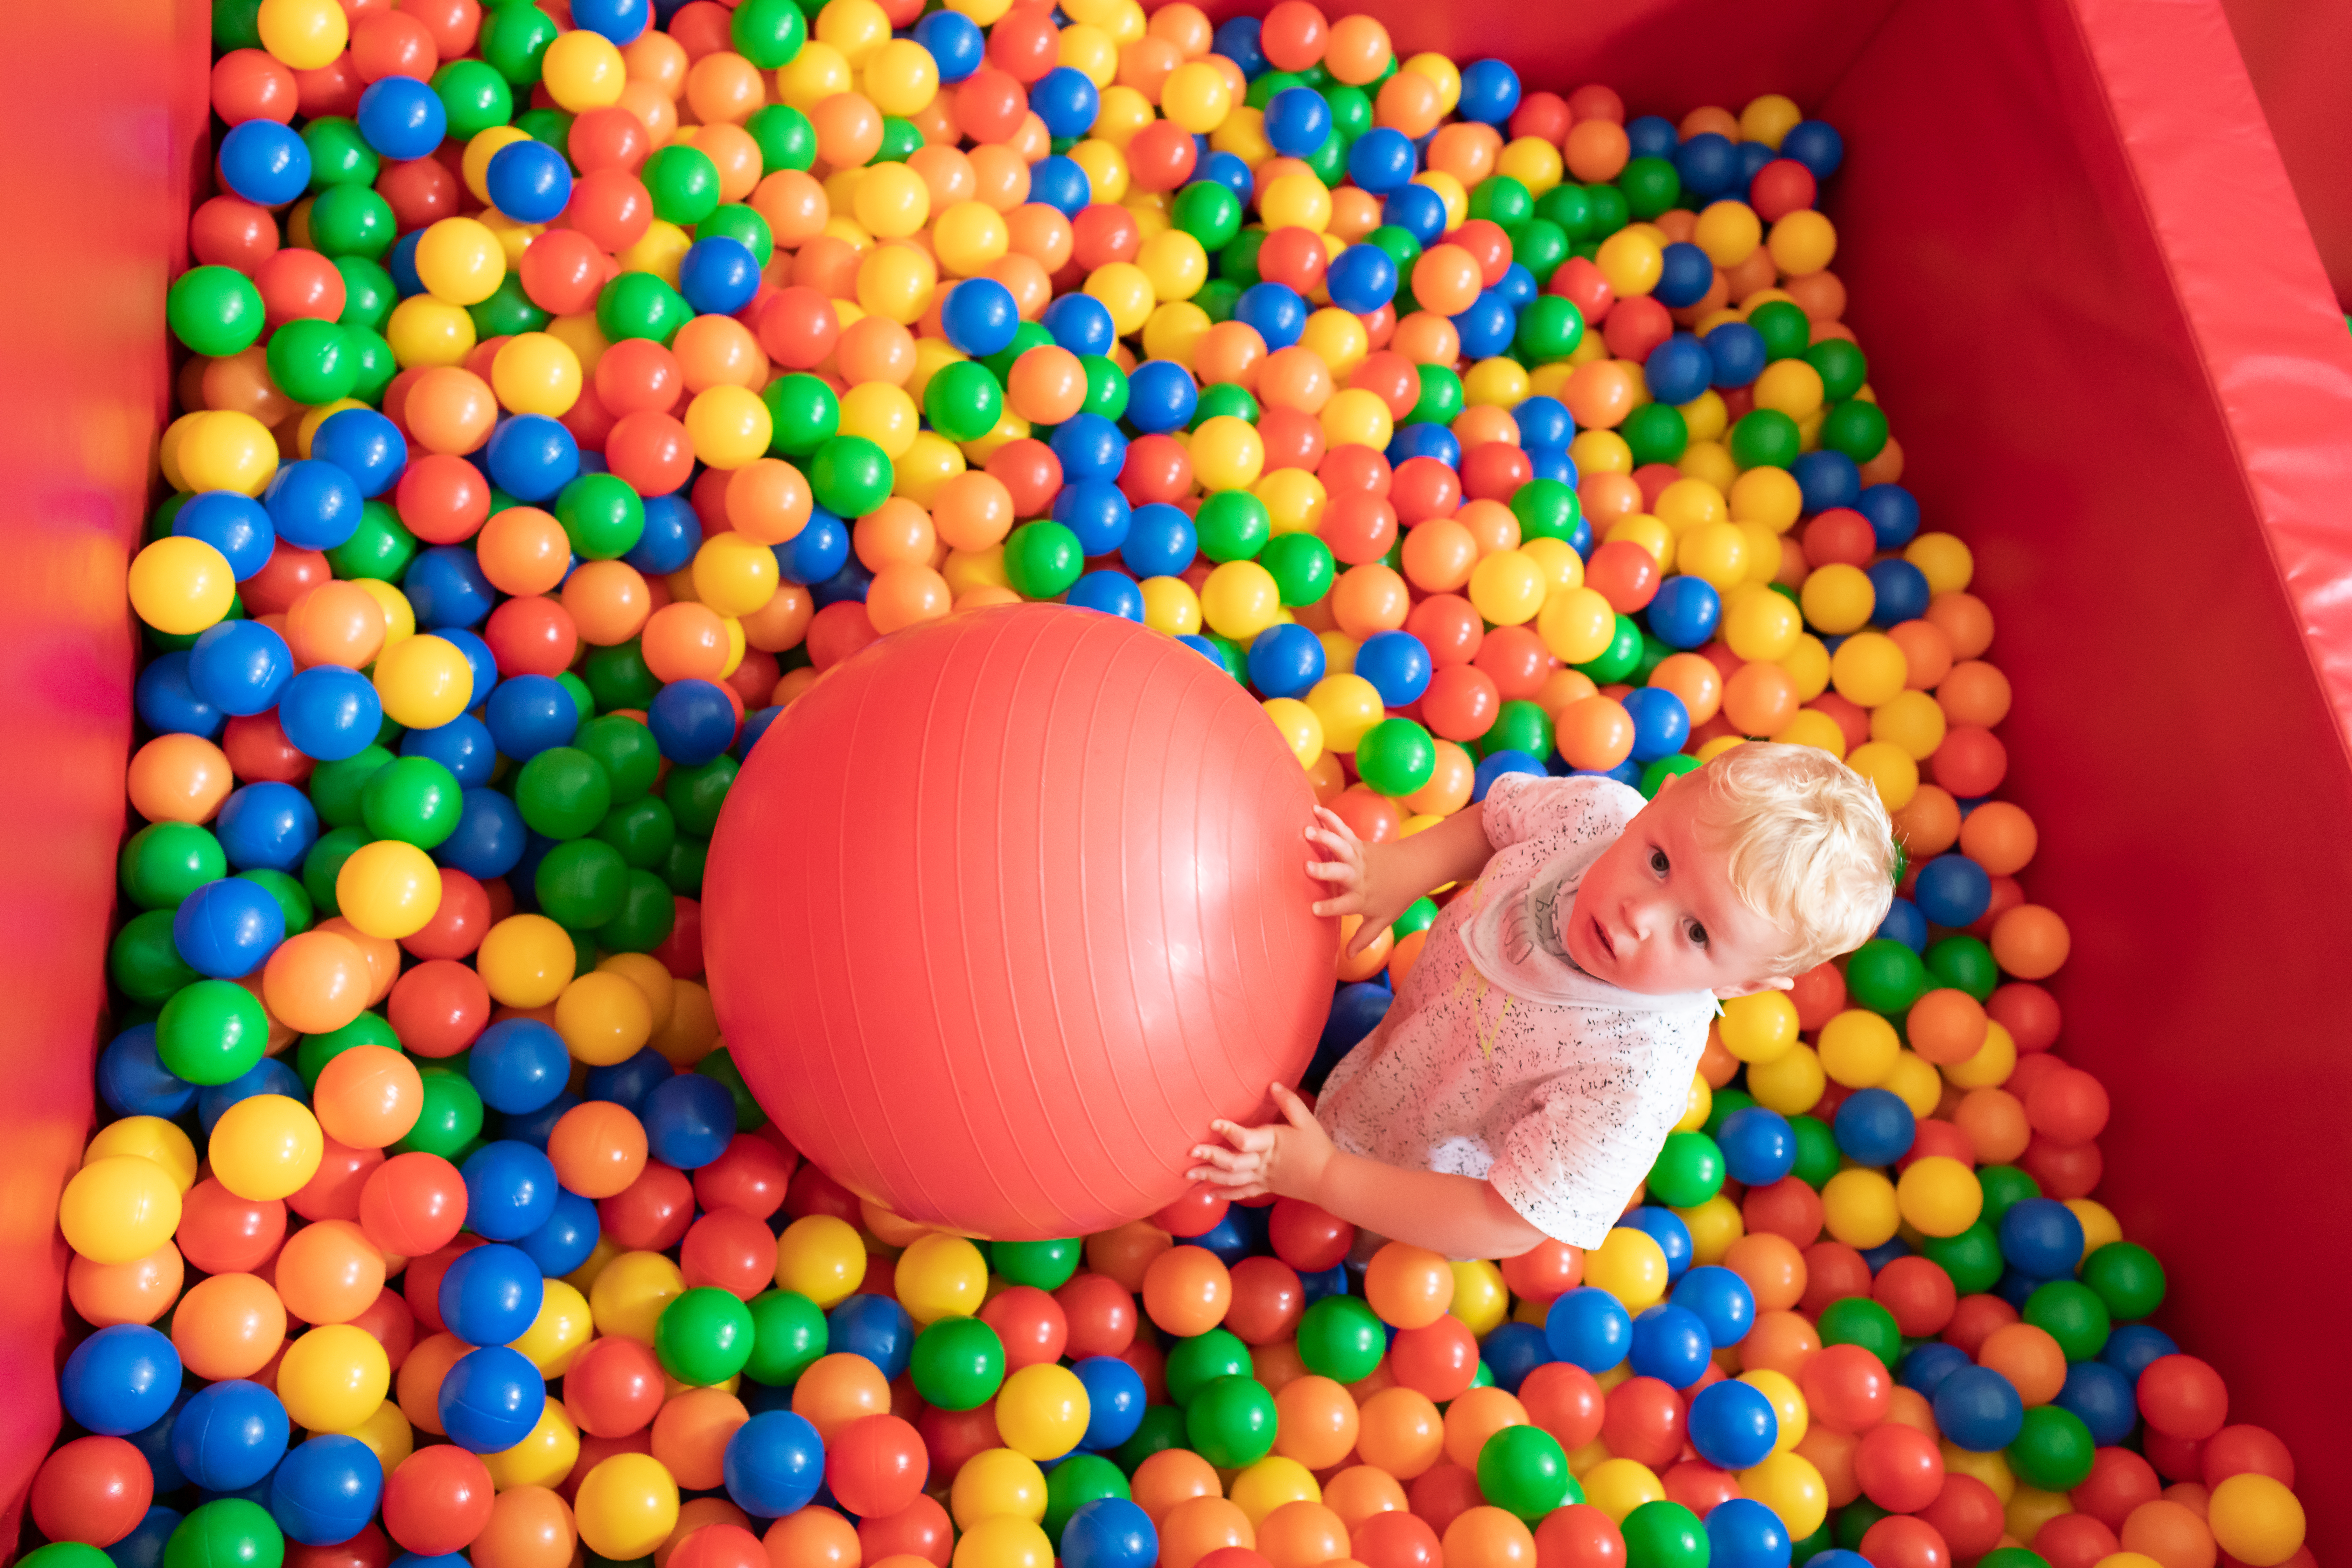 Ralph playing in the ball pit at Demelza Kent.